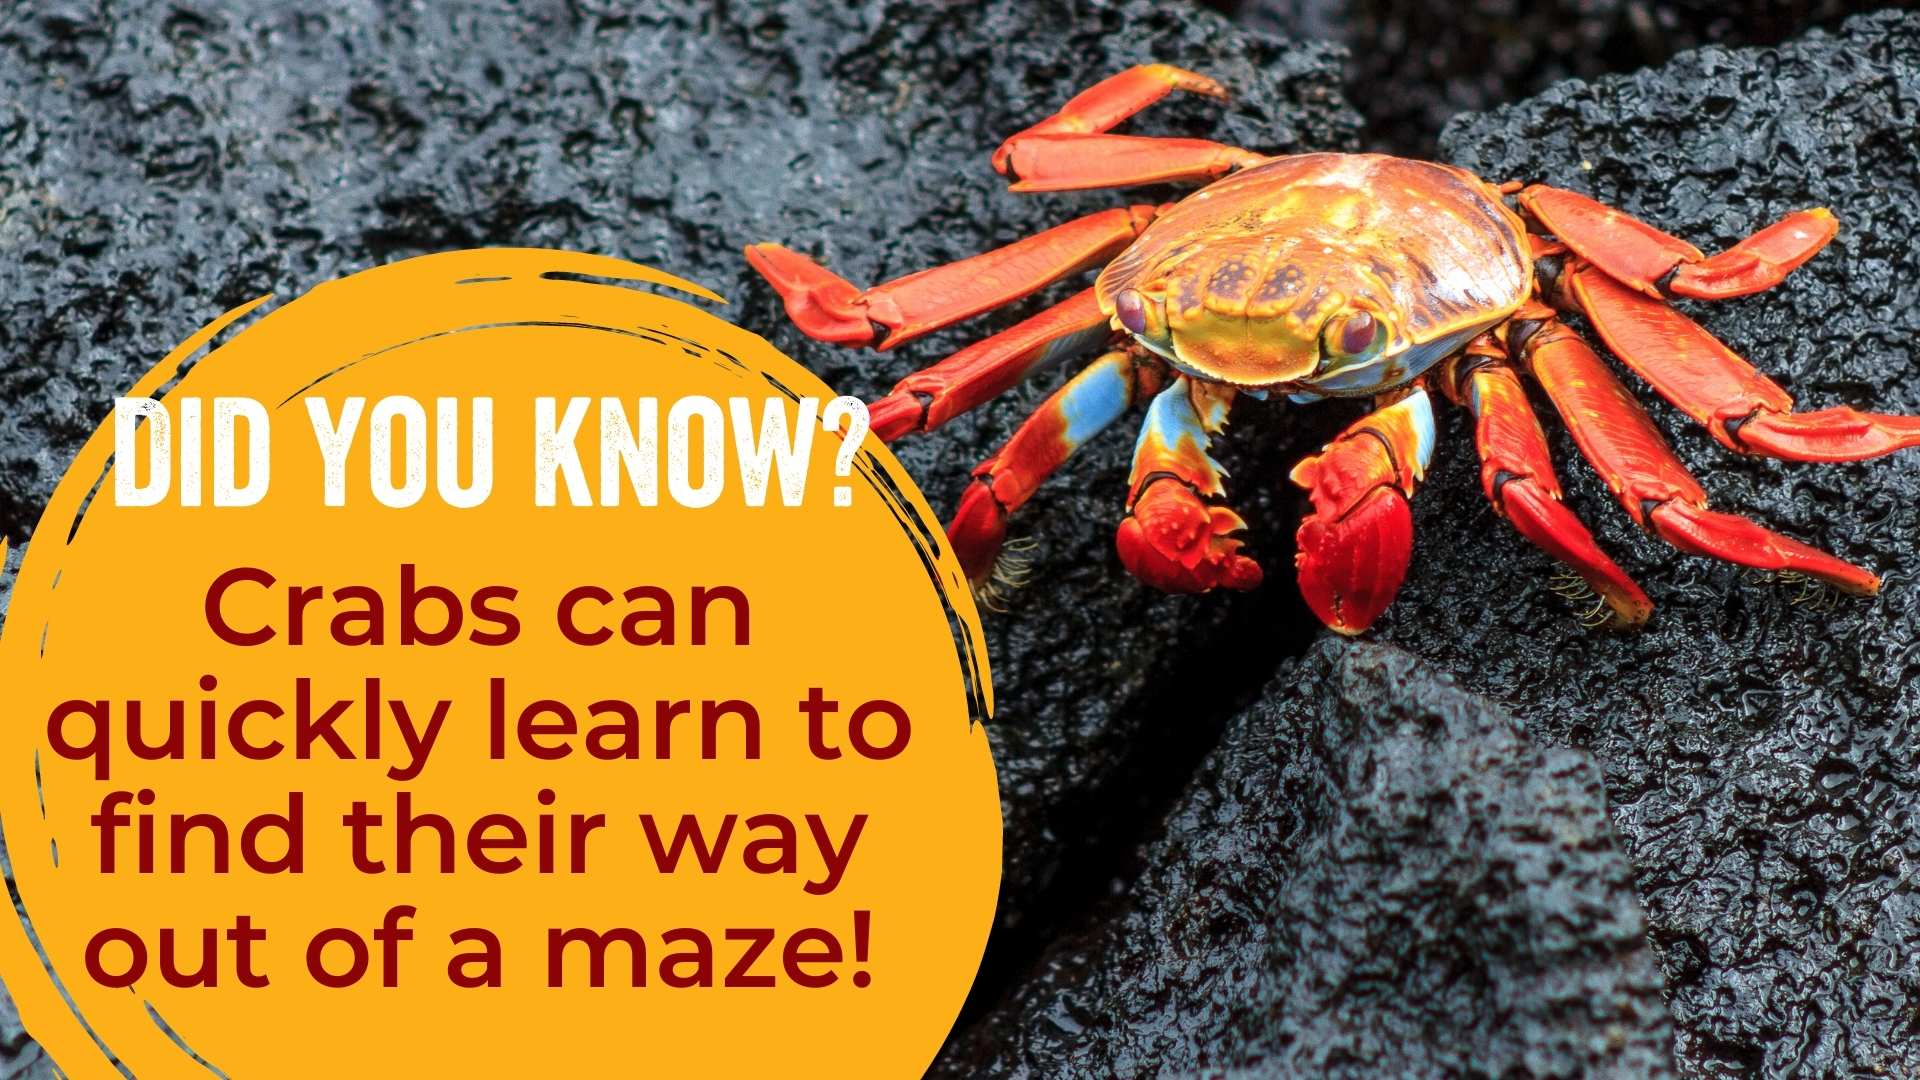 Crabs can quickly learn to find their way out of a maze!